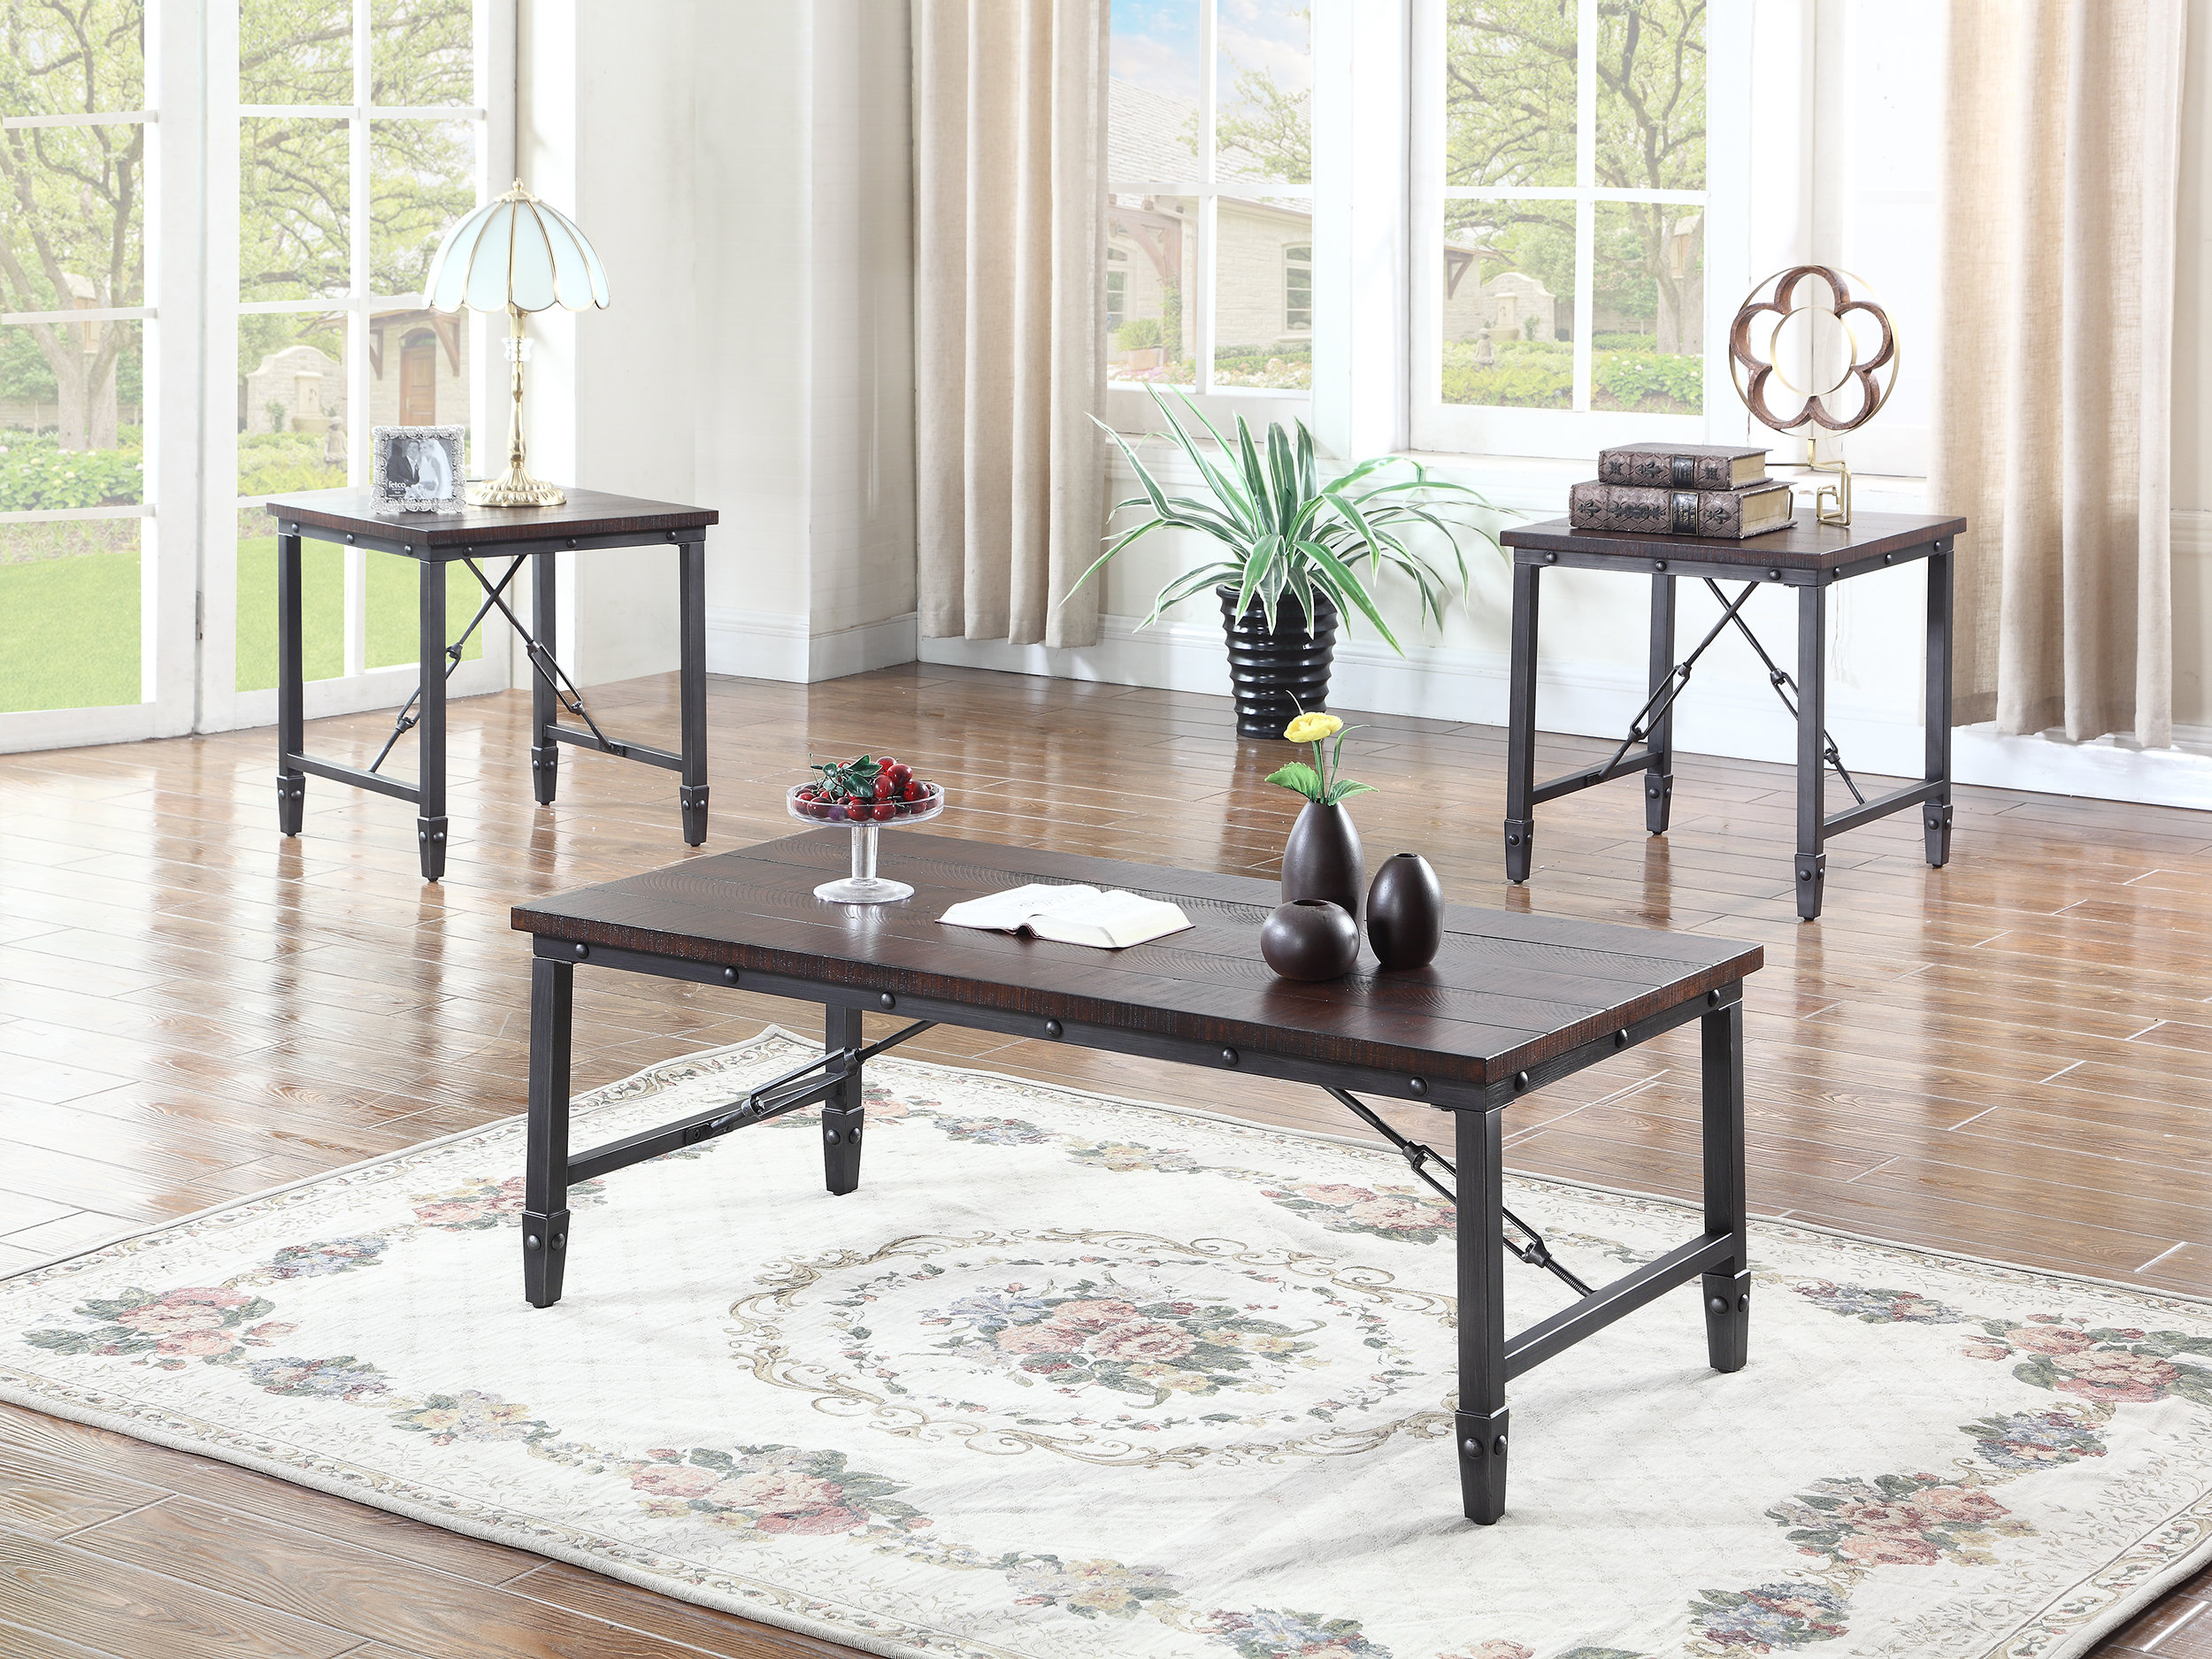 Bestmasterfurniture 3 Piece Coffee Table Set Wayfair for size 2500 X 1875